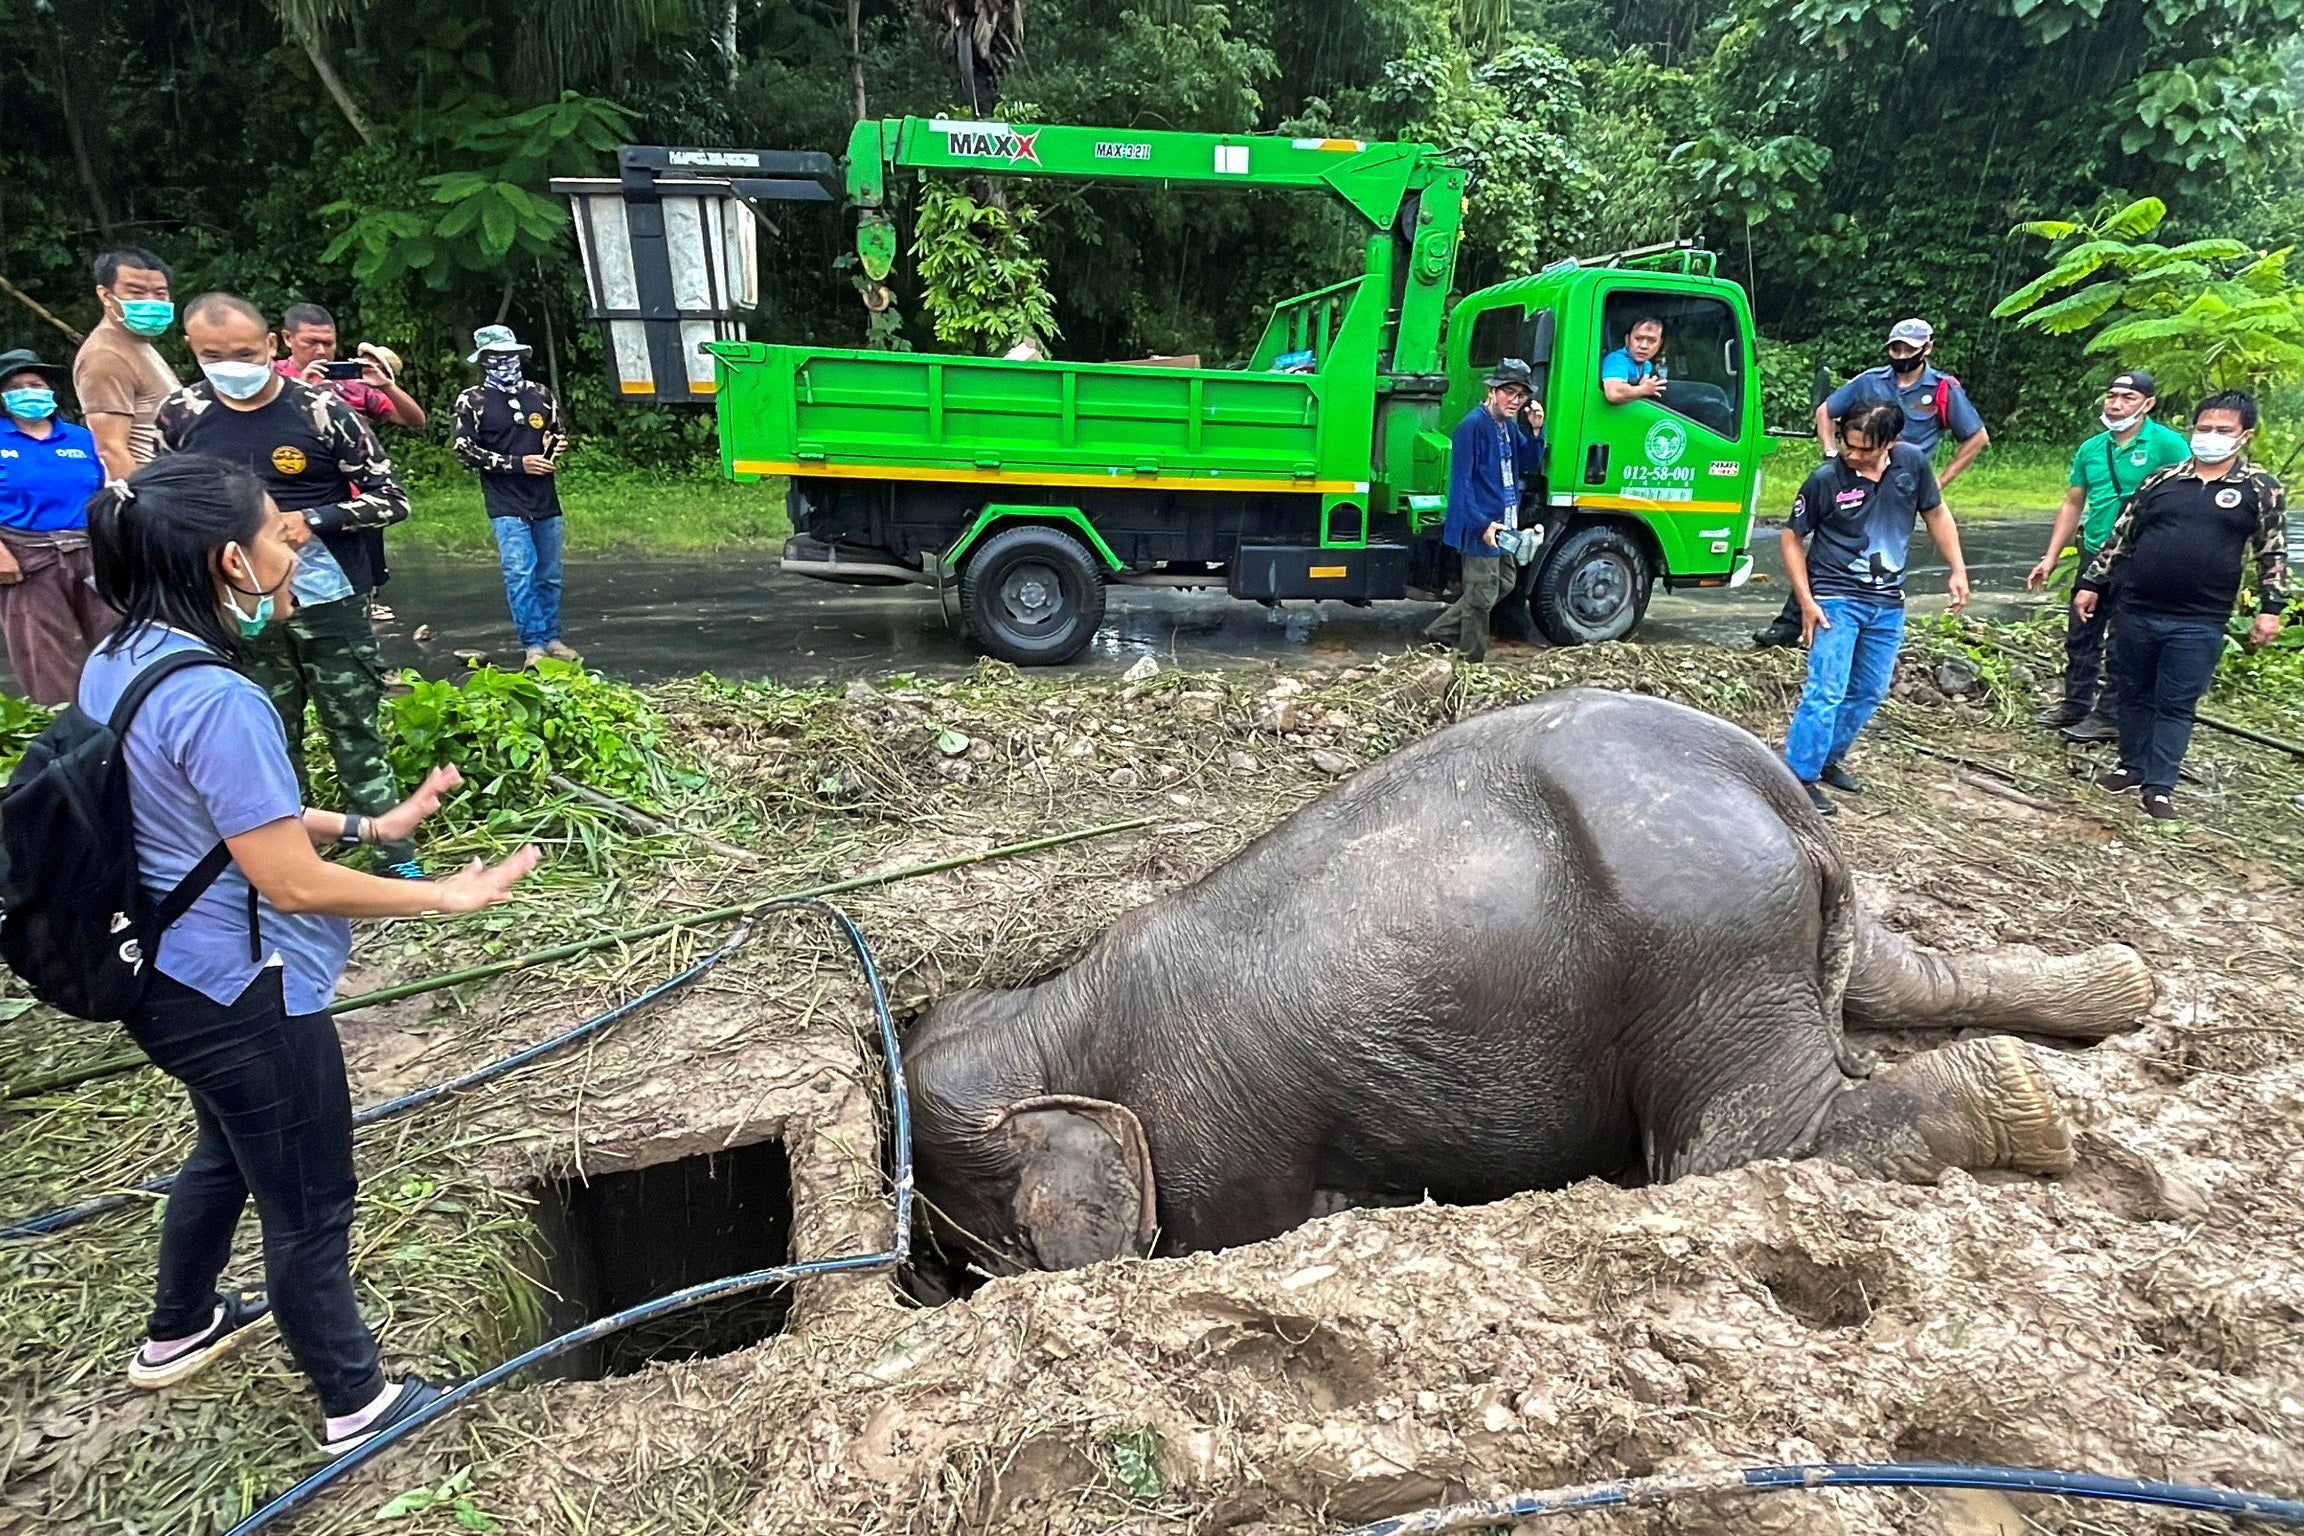 Vets and other experts rescue an elephant after it fell into a drainage hole in Khao Yai National Park, Nakhon Nayok province, Thailand